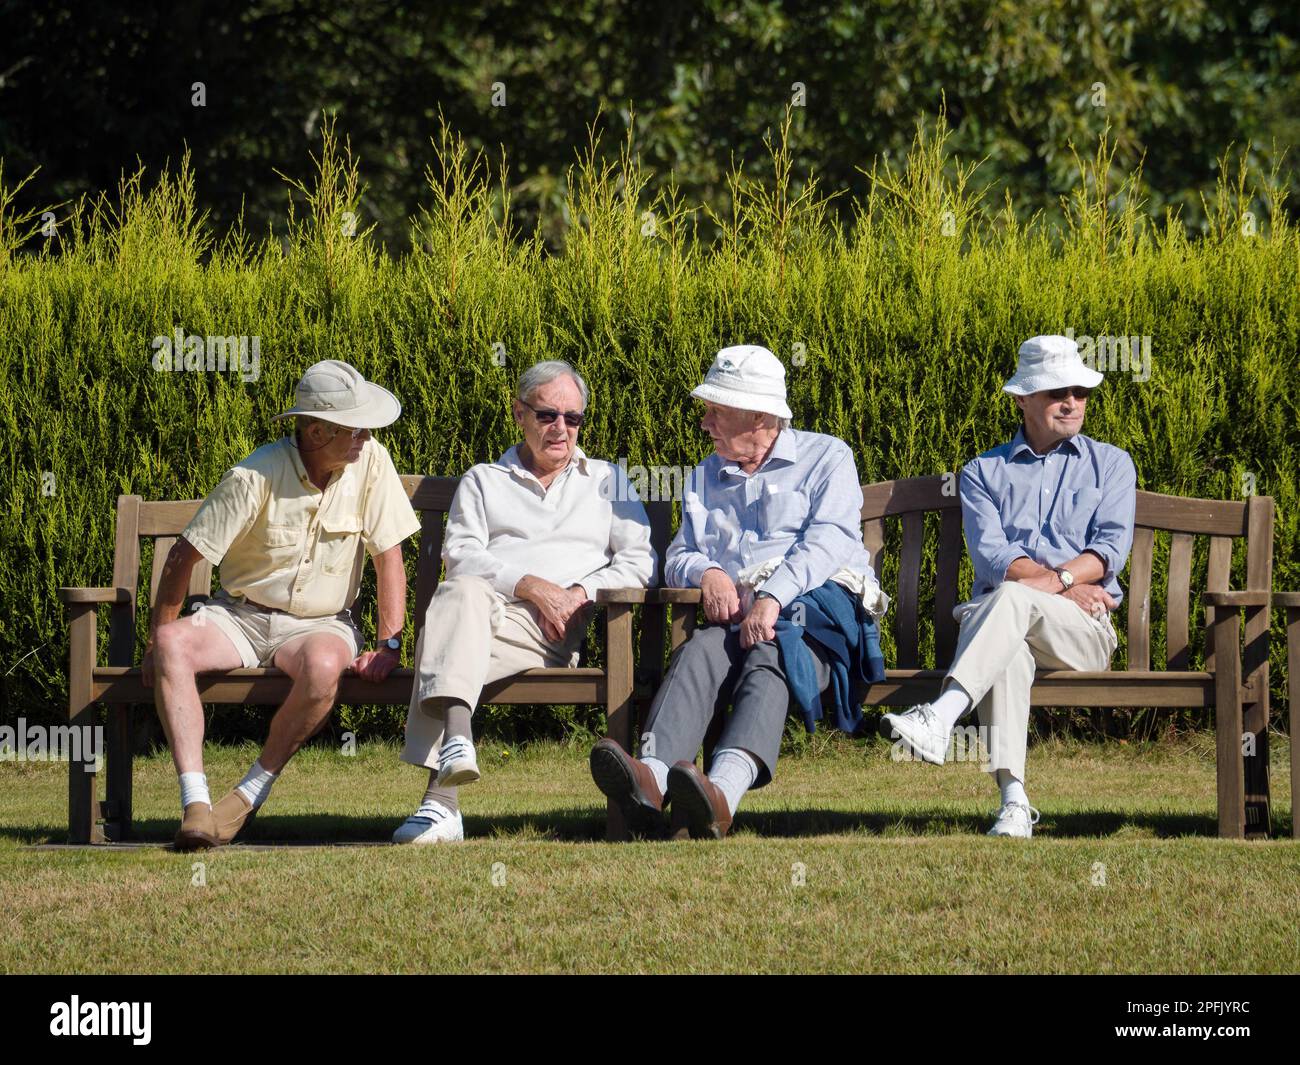 ISLE OF THORNS, SUSSEX/UK - SEPTEMBER 11 : Spectators at a Lawn Bowls Match at Isle of Thorns Chelwood Gate in Sussex on September 11, 2016. Stock Photo